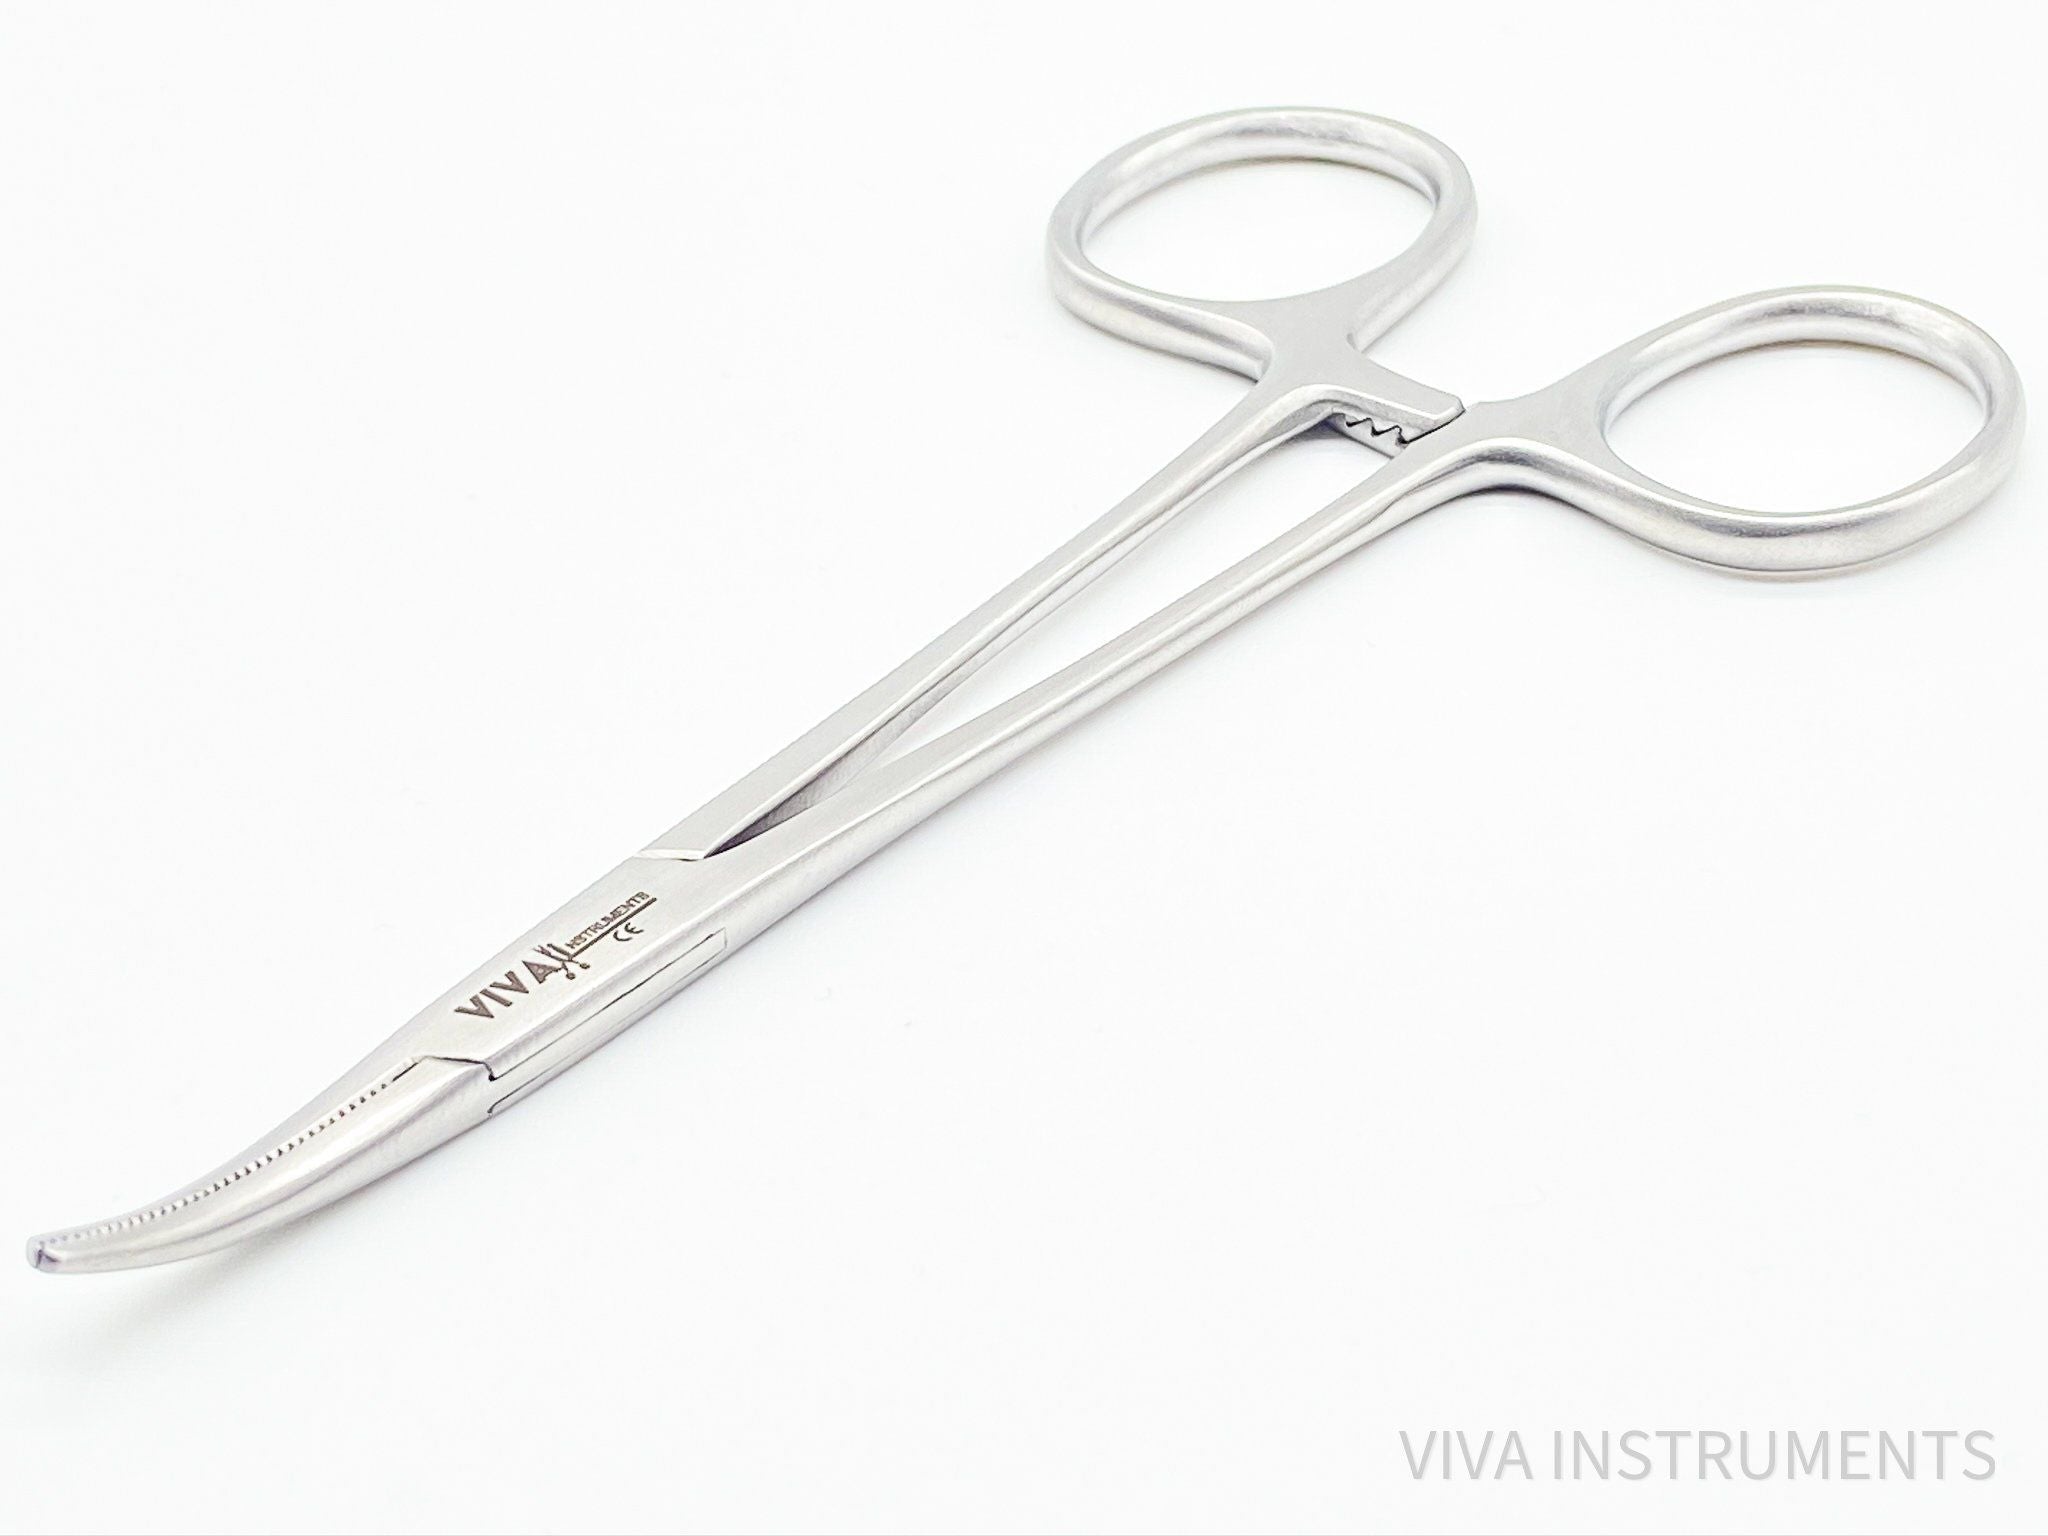 Artery Forceps - Mosquito Forceps Curved 12.5cm